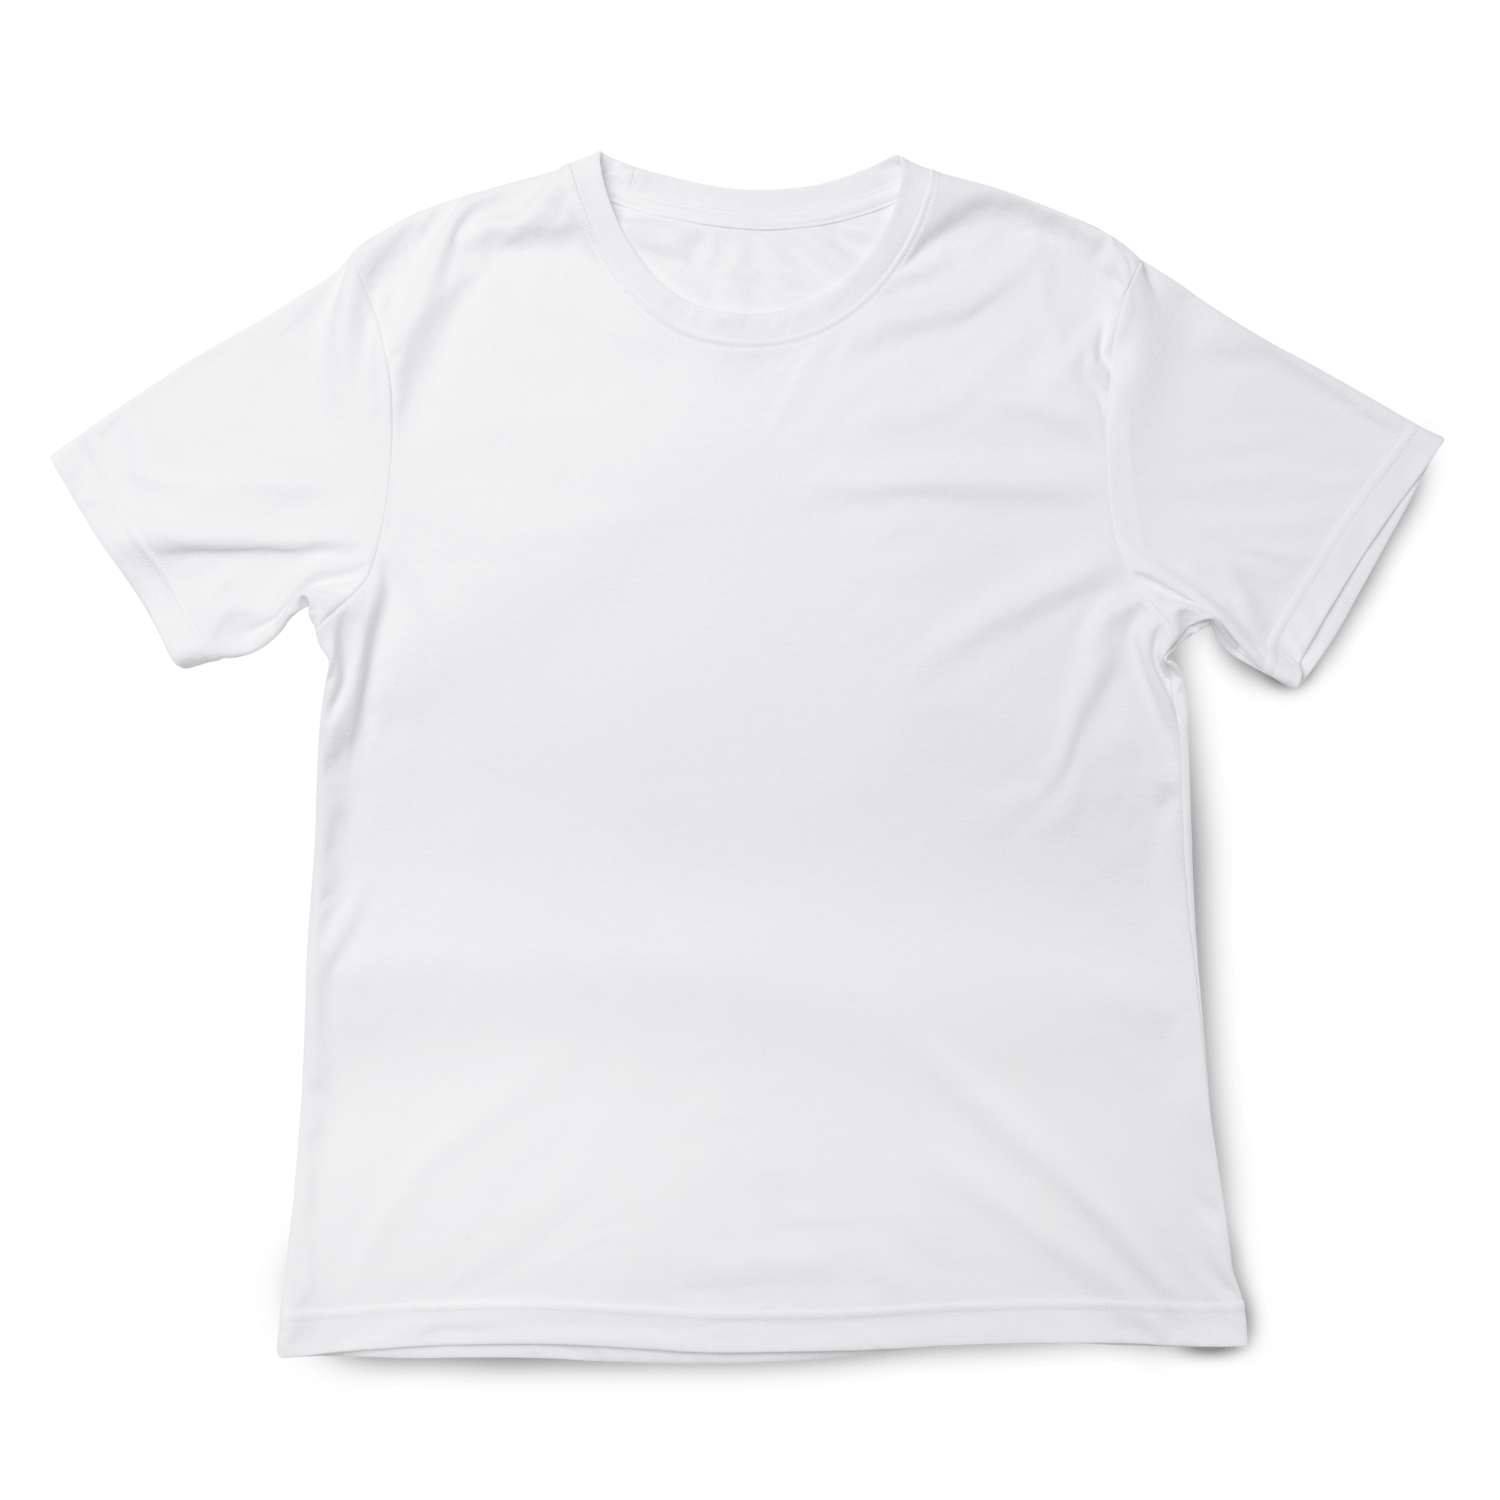 A-SUB PAPER REVIEW  SUBLIMATING 100% POLYESTER T-SHIRT!!! 